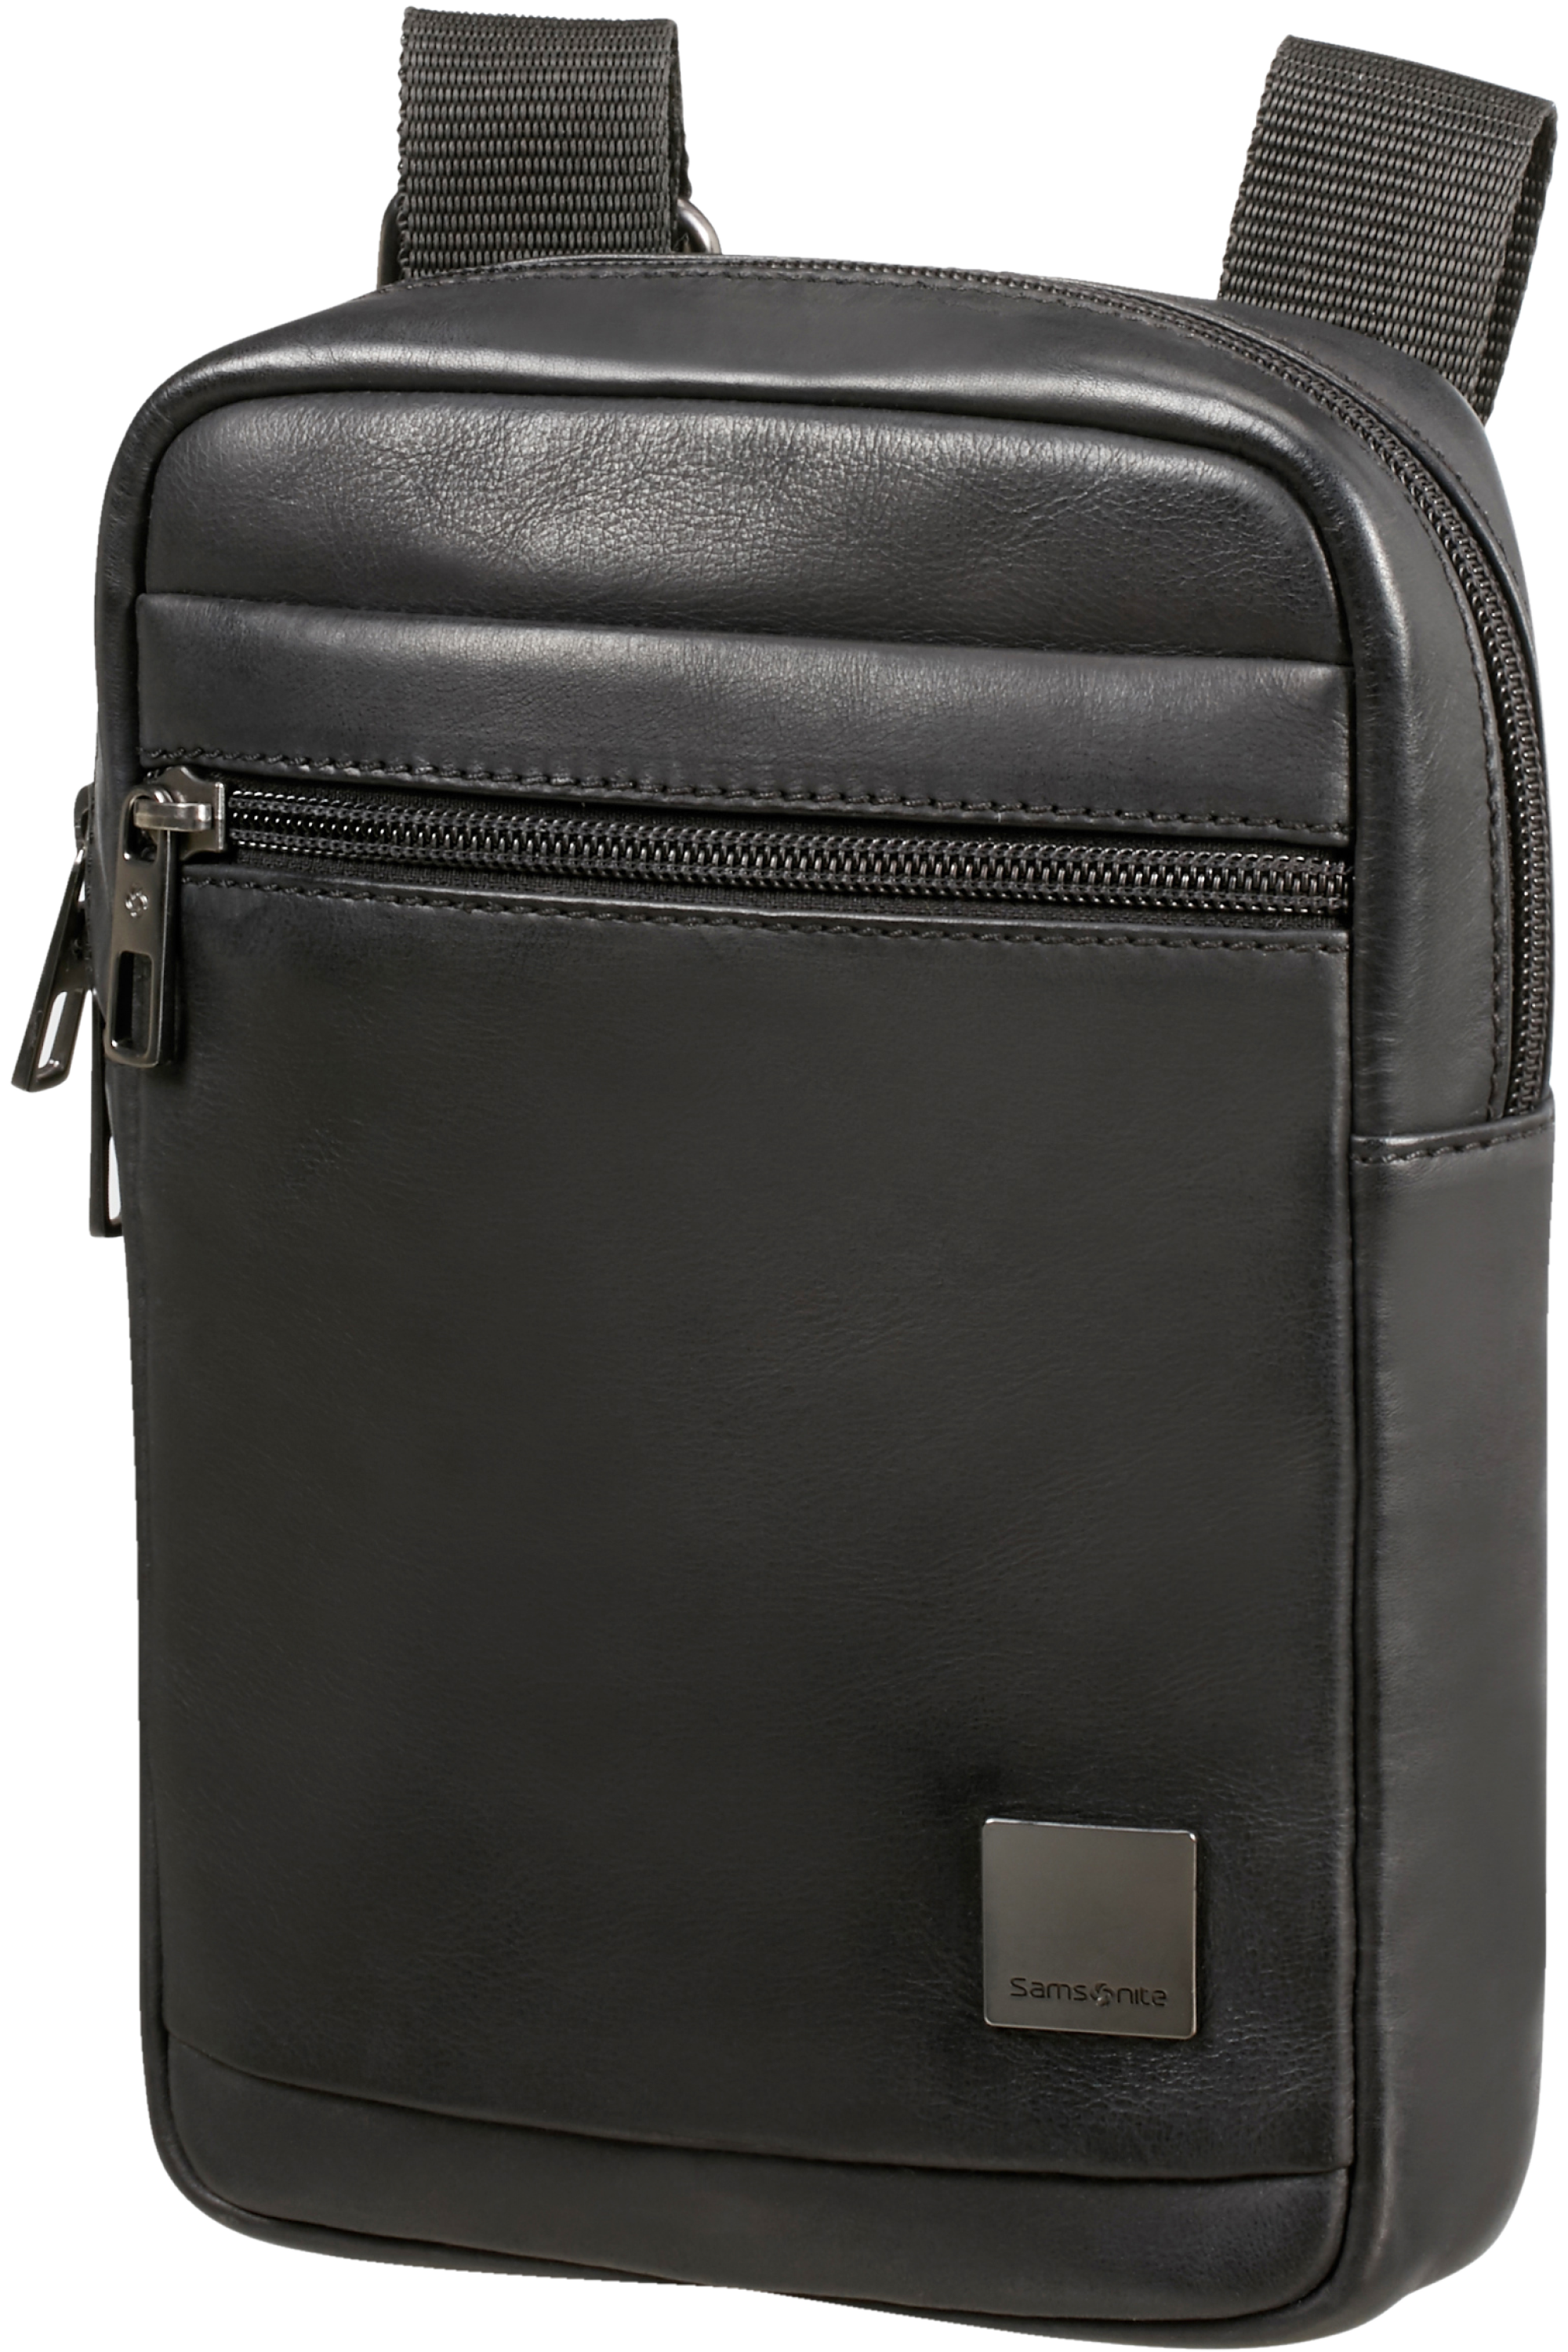 Belt bag Samsonite Securipak KA6*003 Black Steel - American Tourister  suitcase store - buy a suitcase in the company's online store